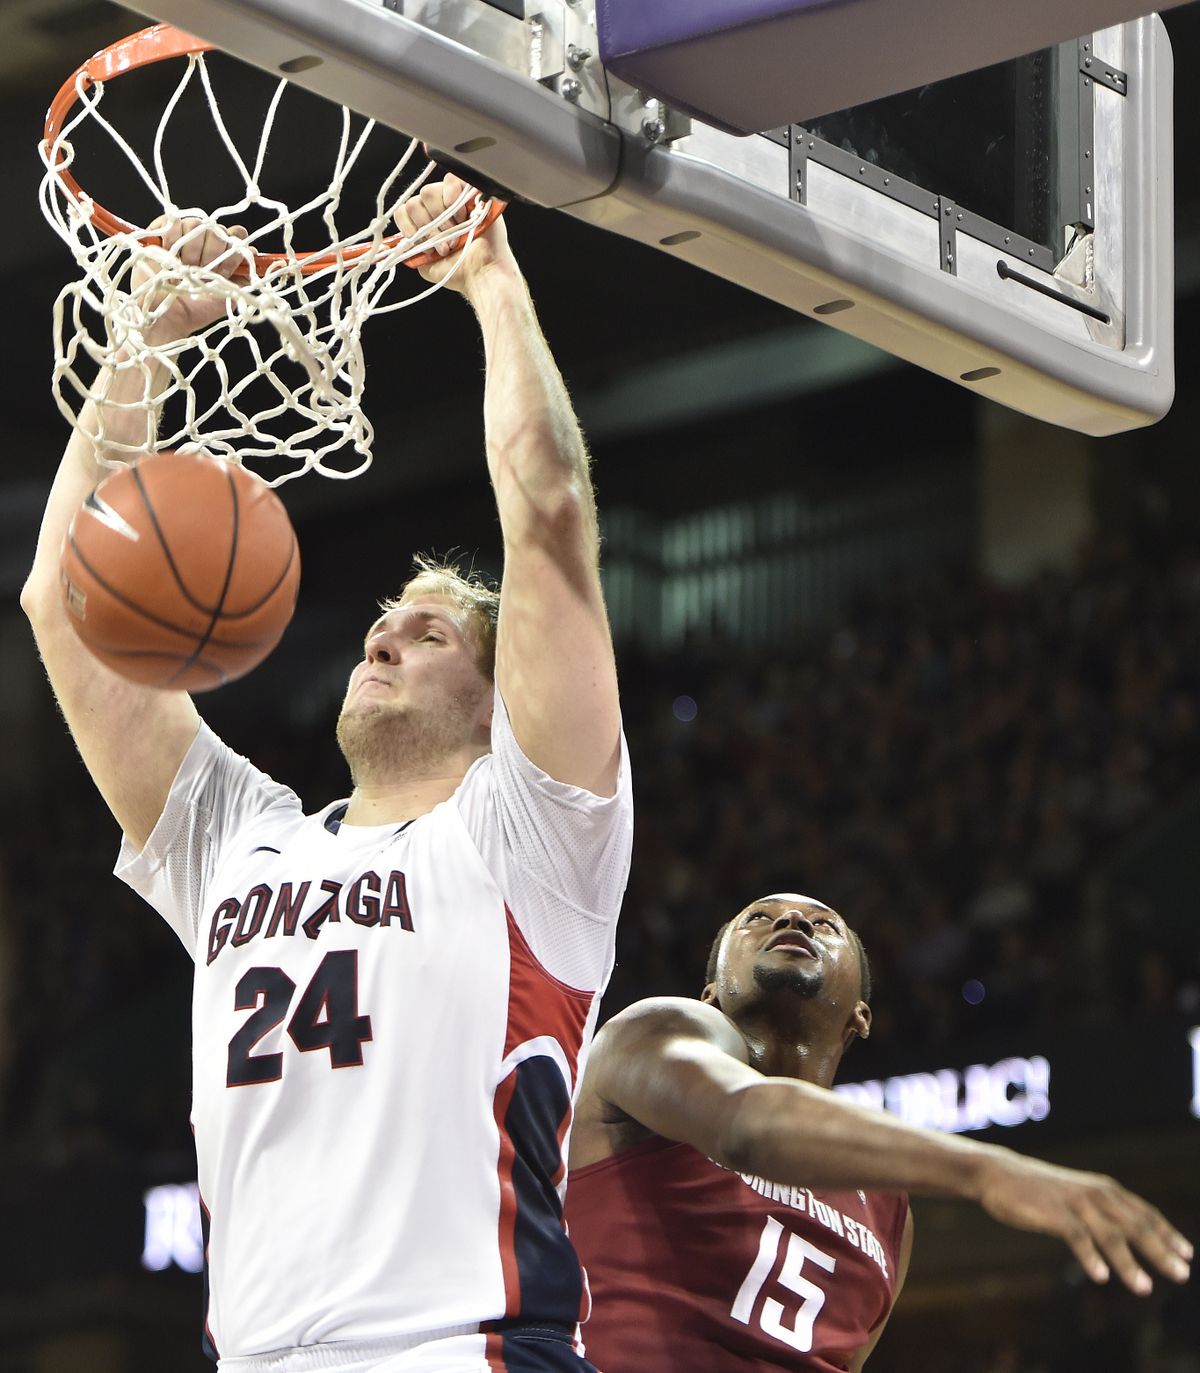 Gonzaga’s Przemek Karnowski powered inside Wednesday for eight rebounds and tied his career high with 22 points, including this first-half dunk against Washington State’s Junior Longrus. (TYLER TJOMSLAND PHOTOS)